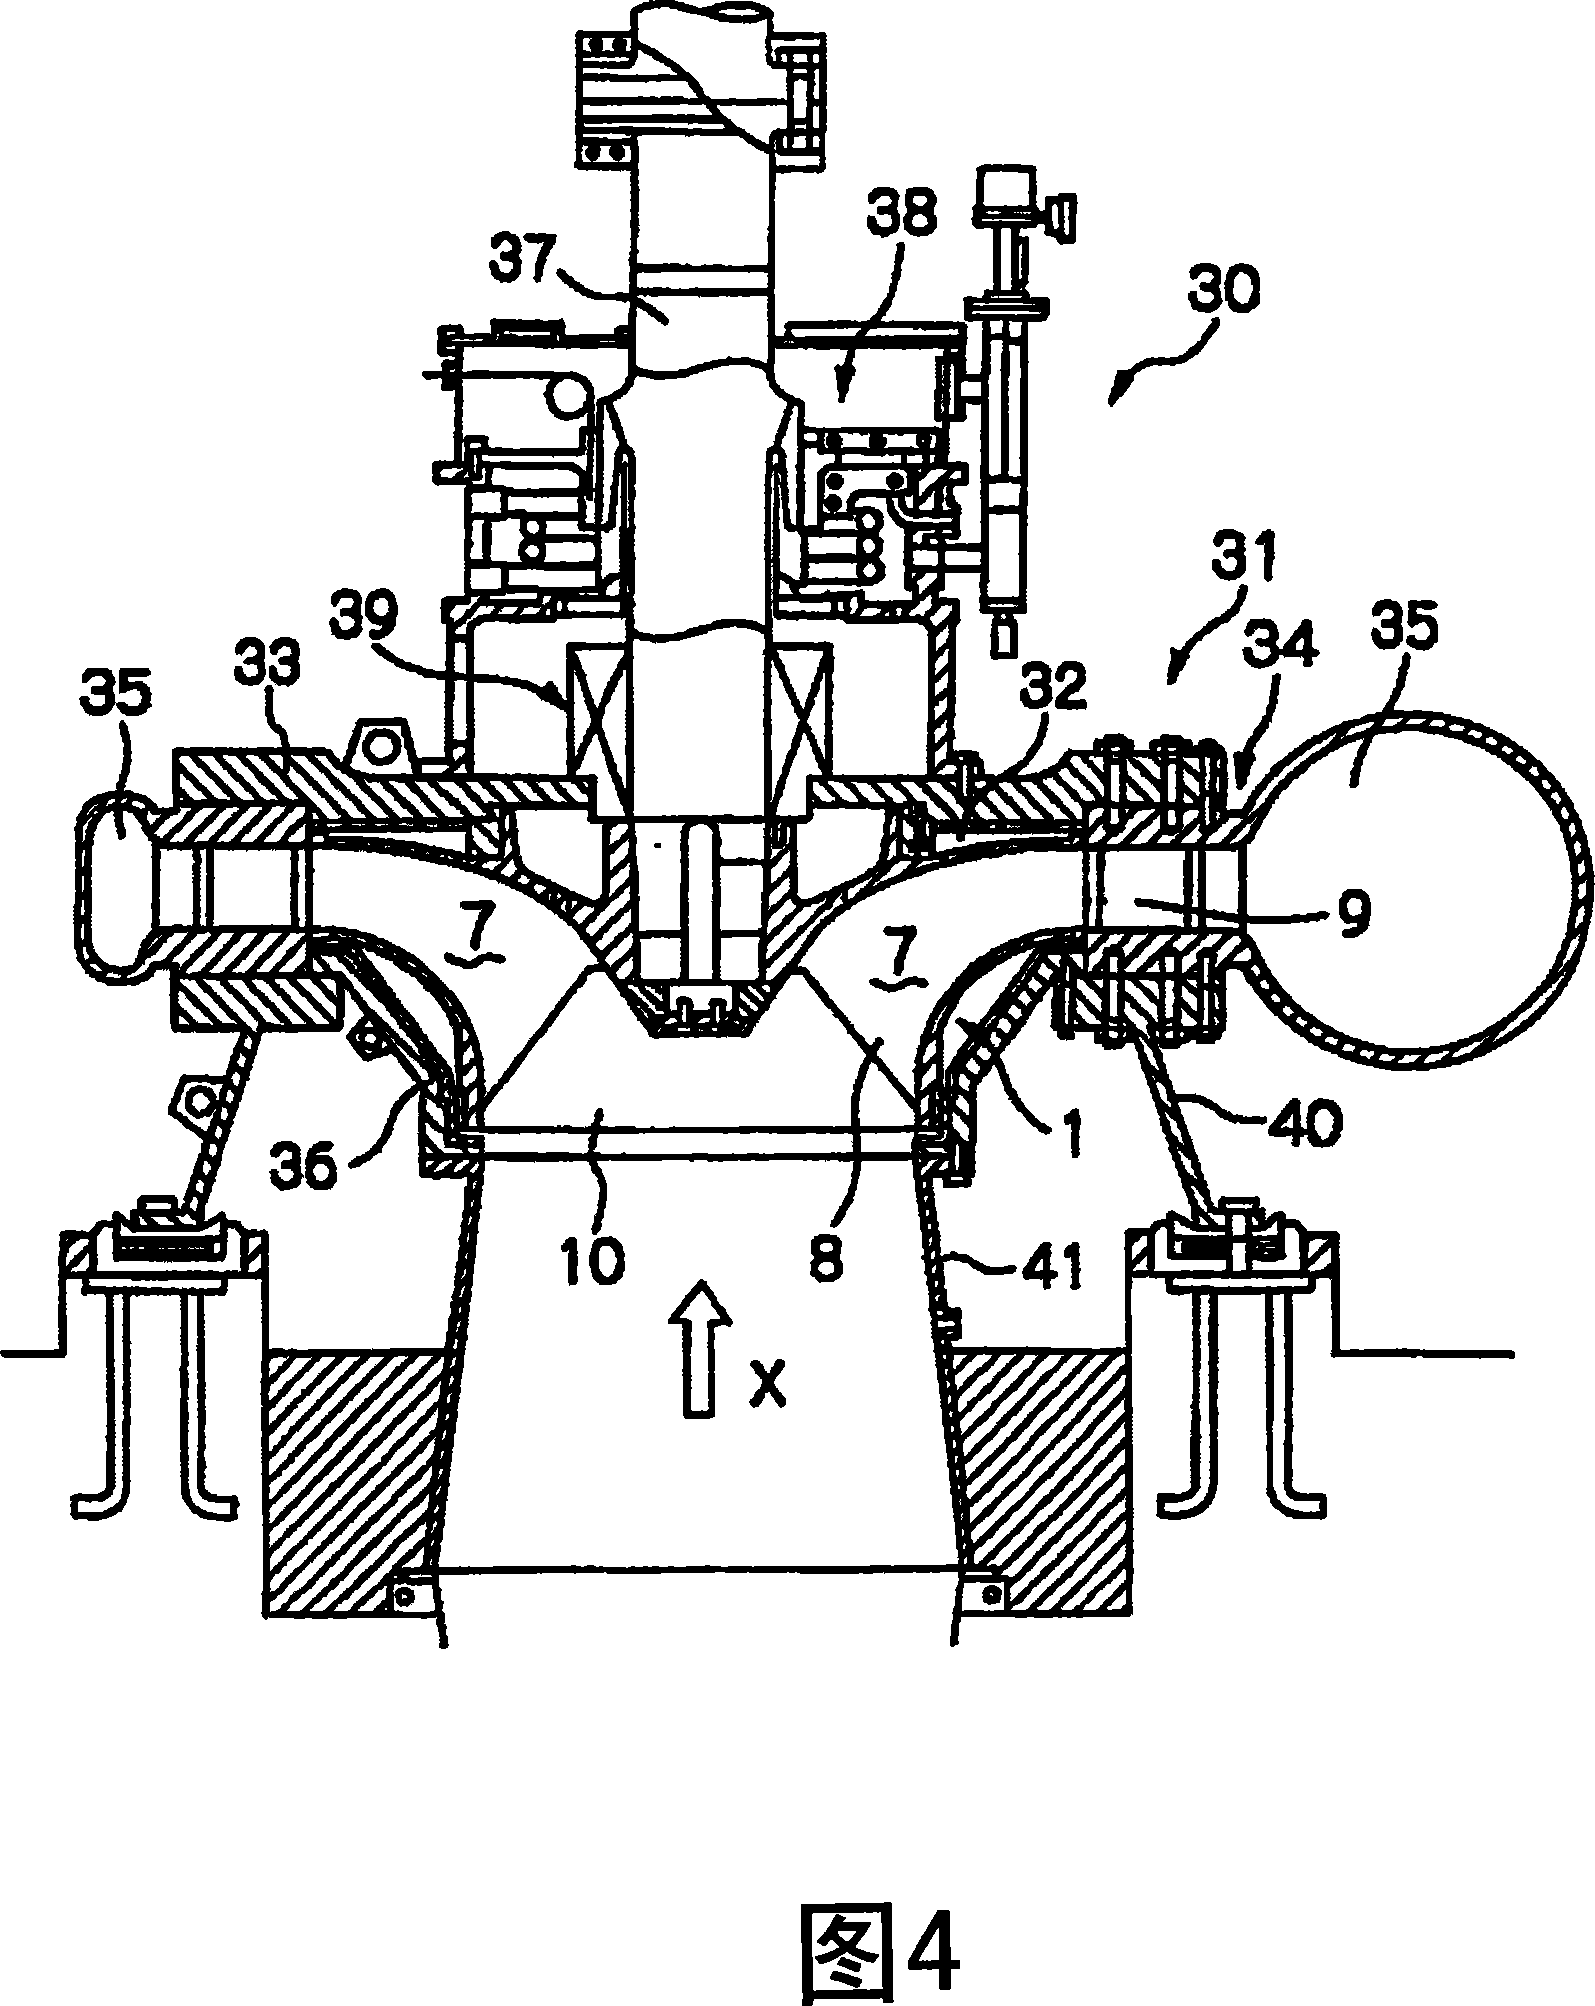 Fluid mechanical part resistant to slurry erosiveness and fluid machinery having same